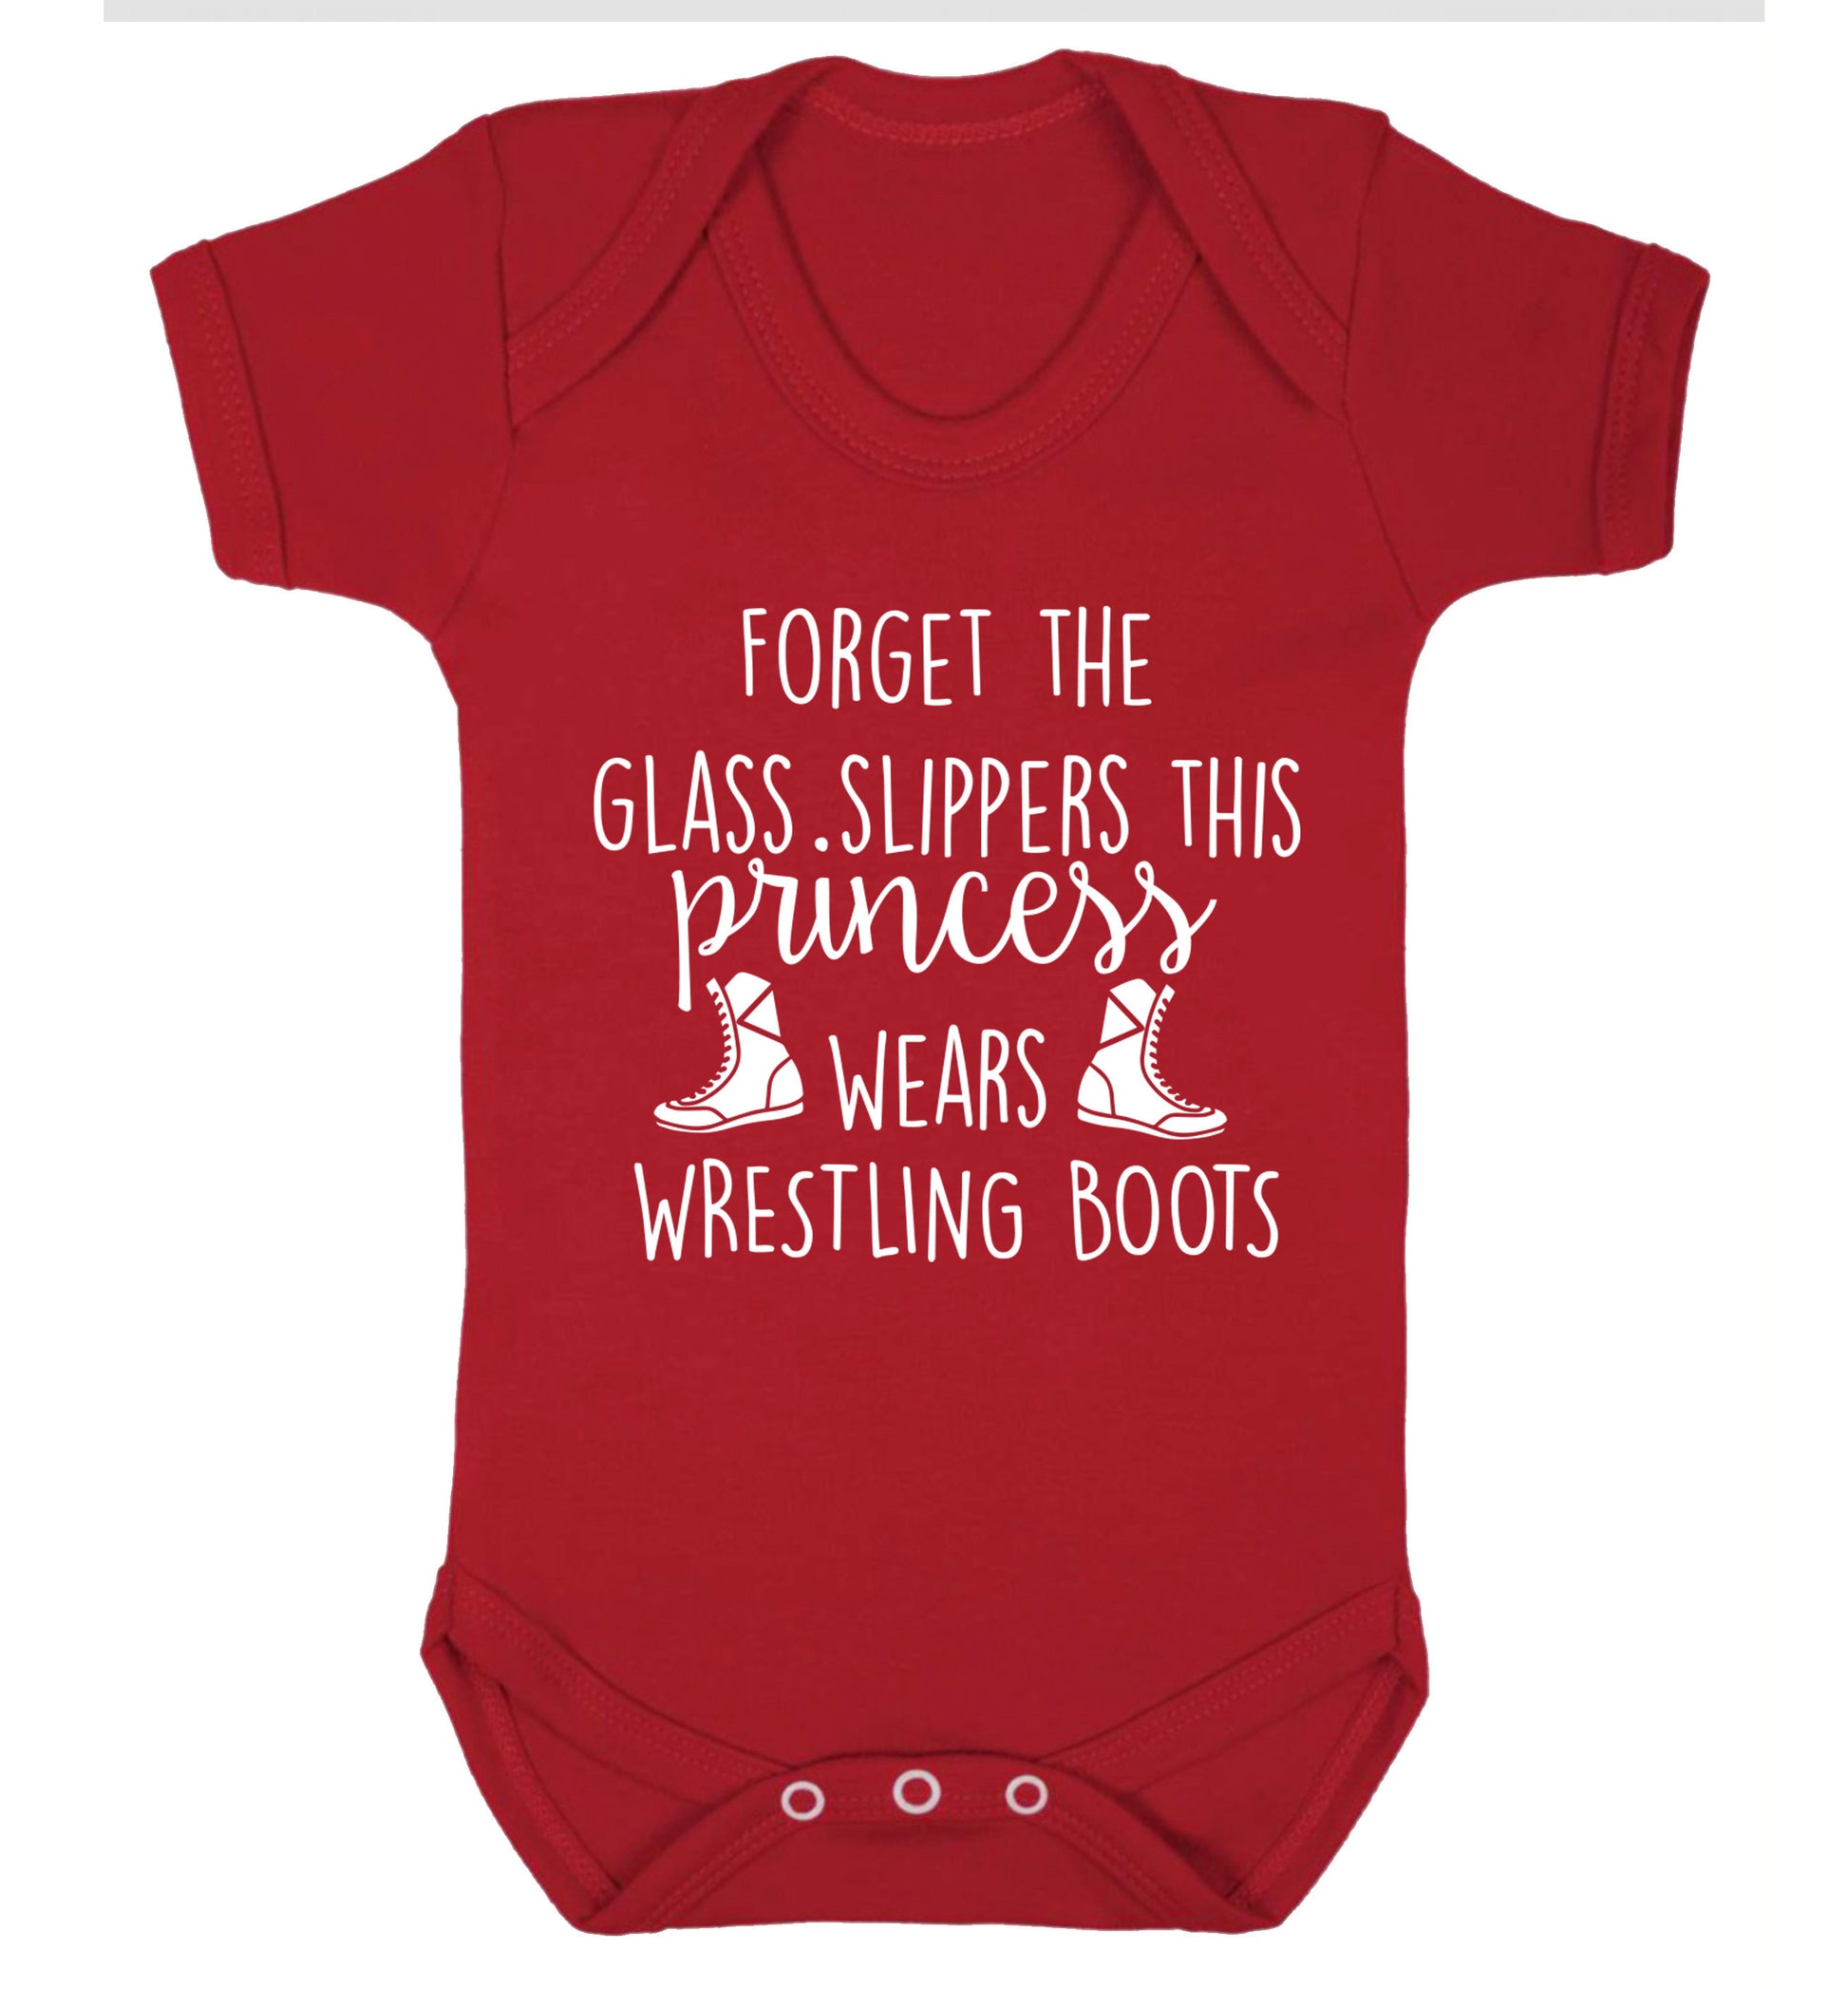 Forget the glass slippers this princess wears wrestling boots Baby Vest red 18-24 months